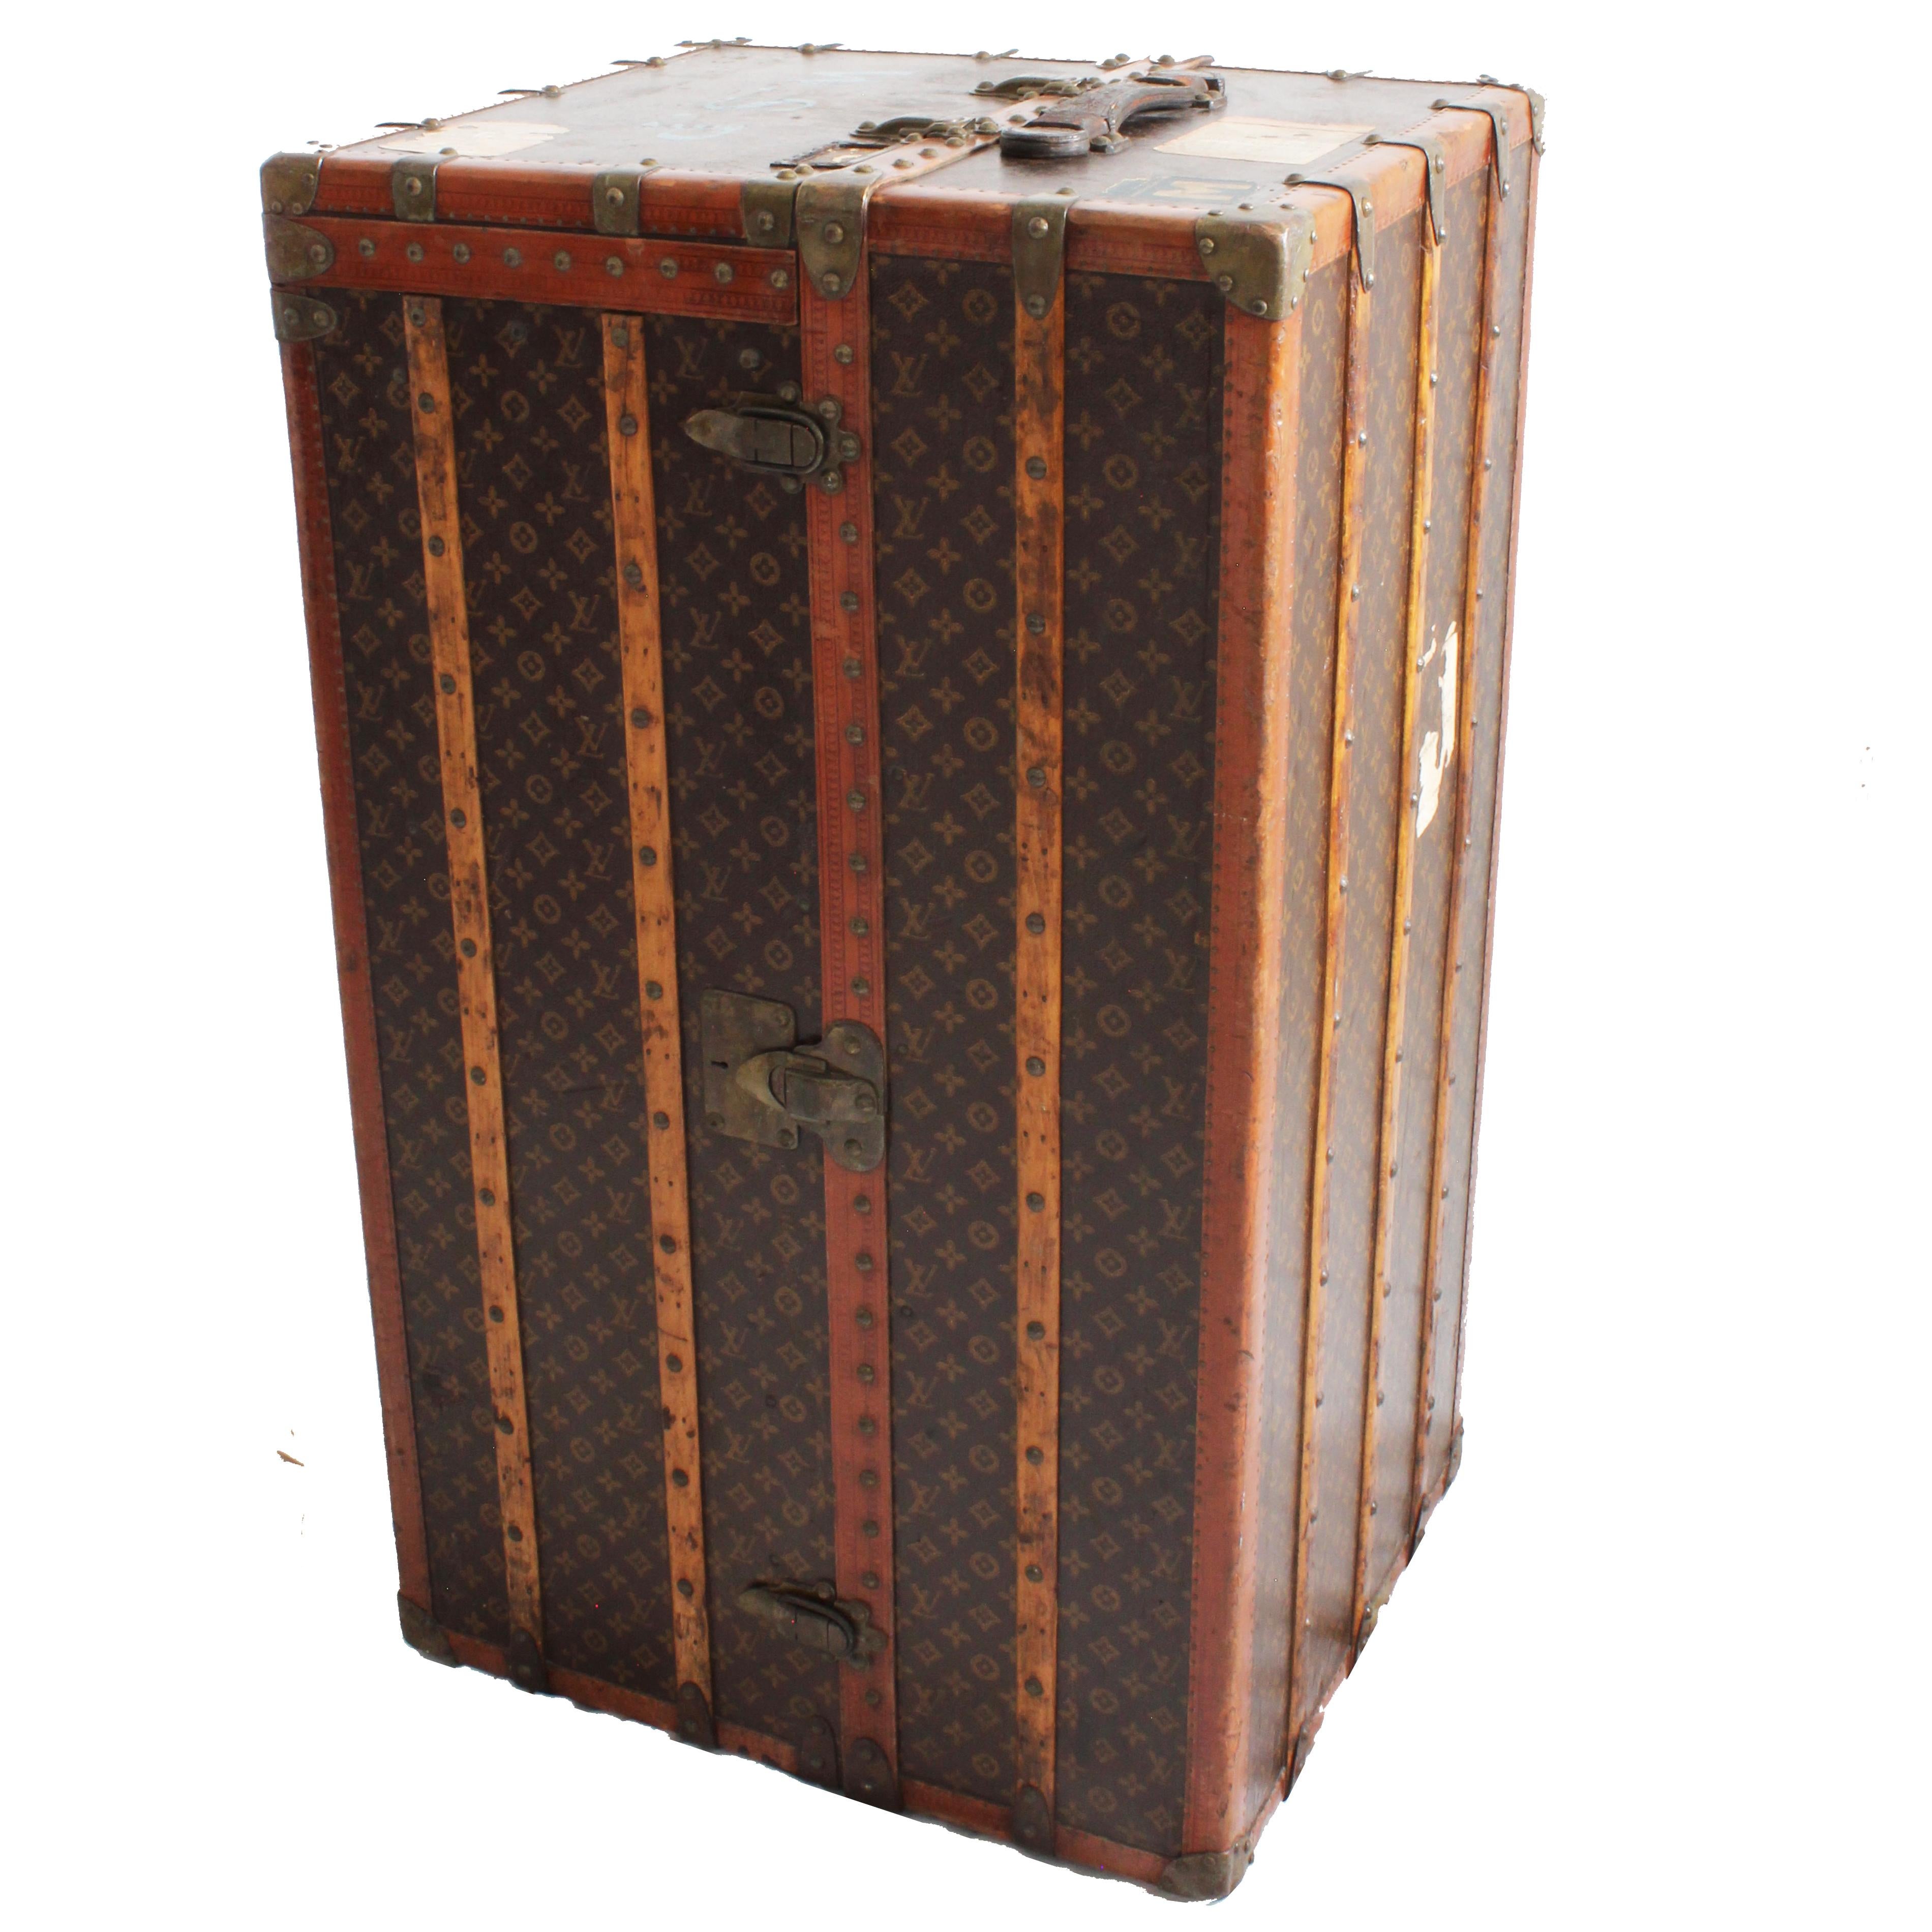 Louis Vuitton Large Wardrobe Steamer Trunk Monogram Travel Case Early 20th C  For Sale 2